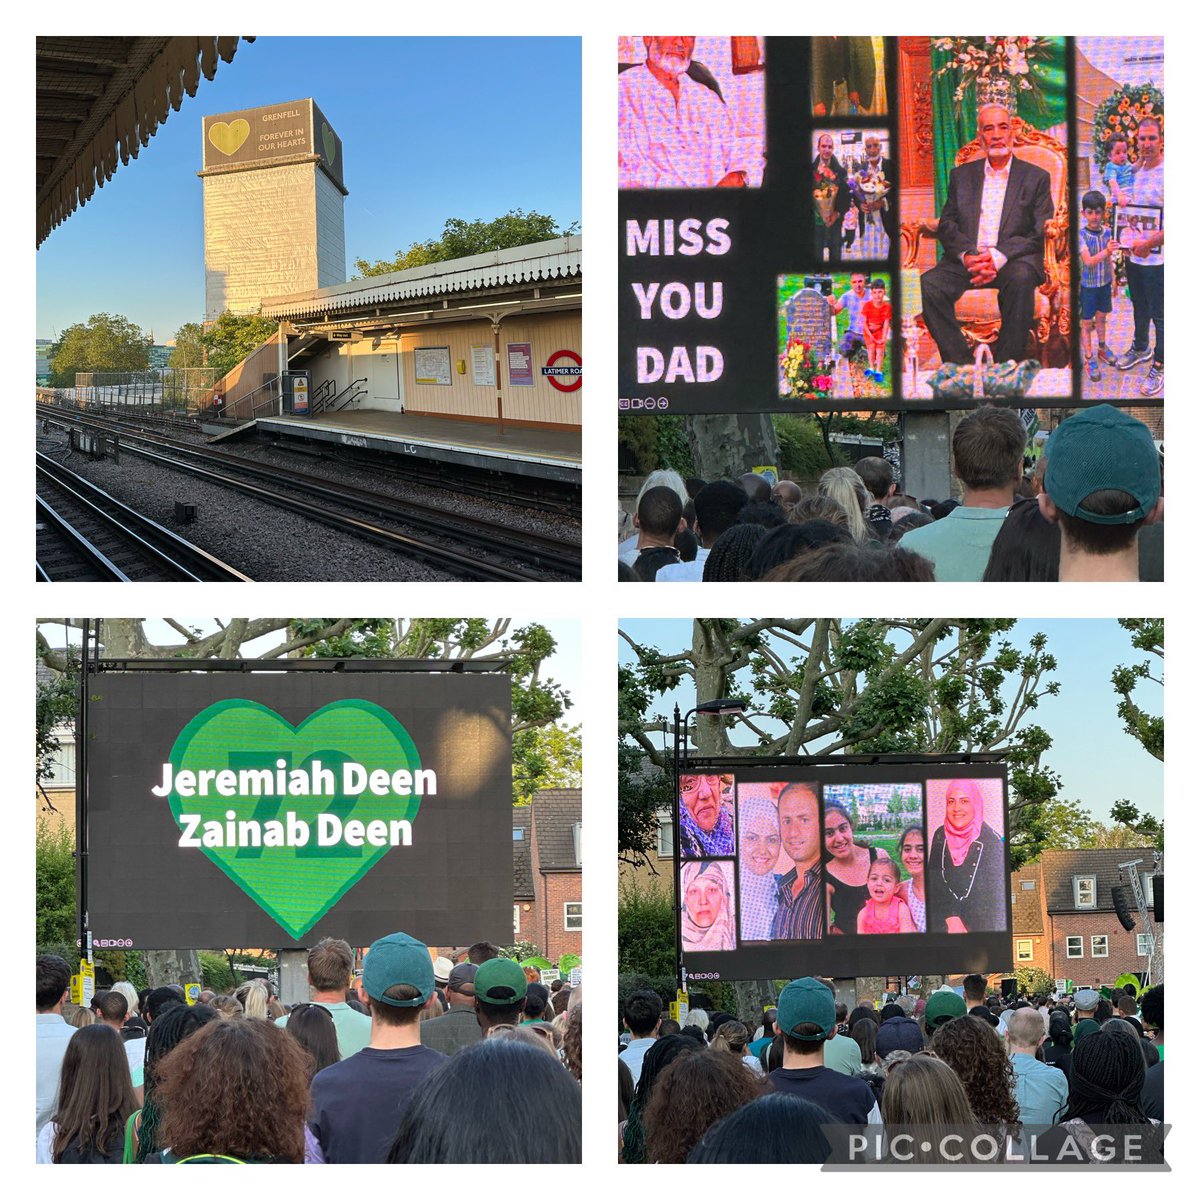 Extremely moving ceremony tonight at the #Grenfell silent walk. 
When the 72 names who died are read out, realising the ages, number of kids and families who have been lost.
It’s another huge stain on our justice system that no one has been held to account.
#Justice4Grenfell 💚